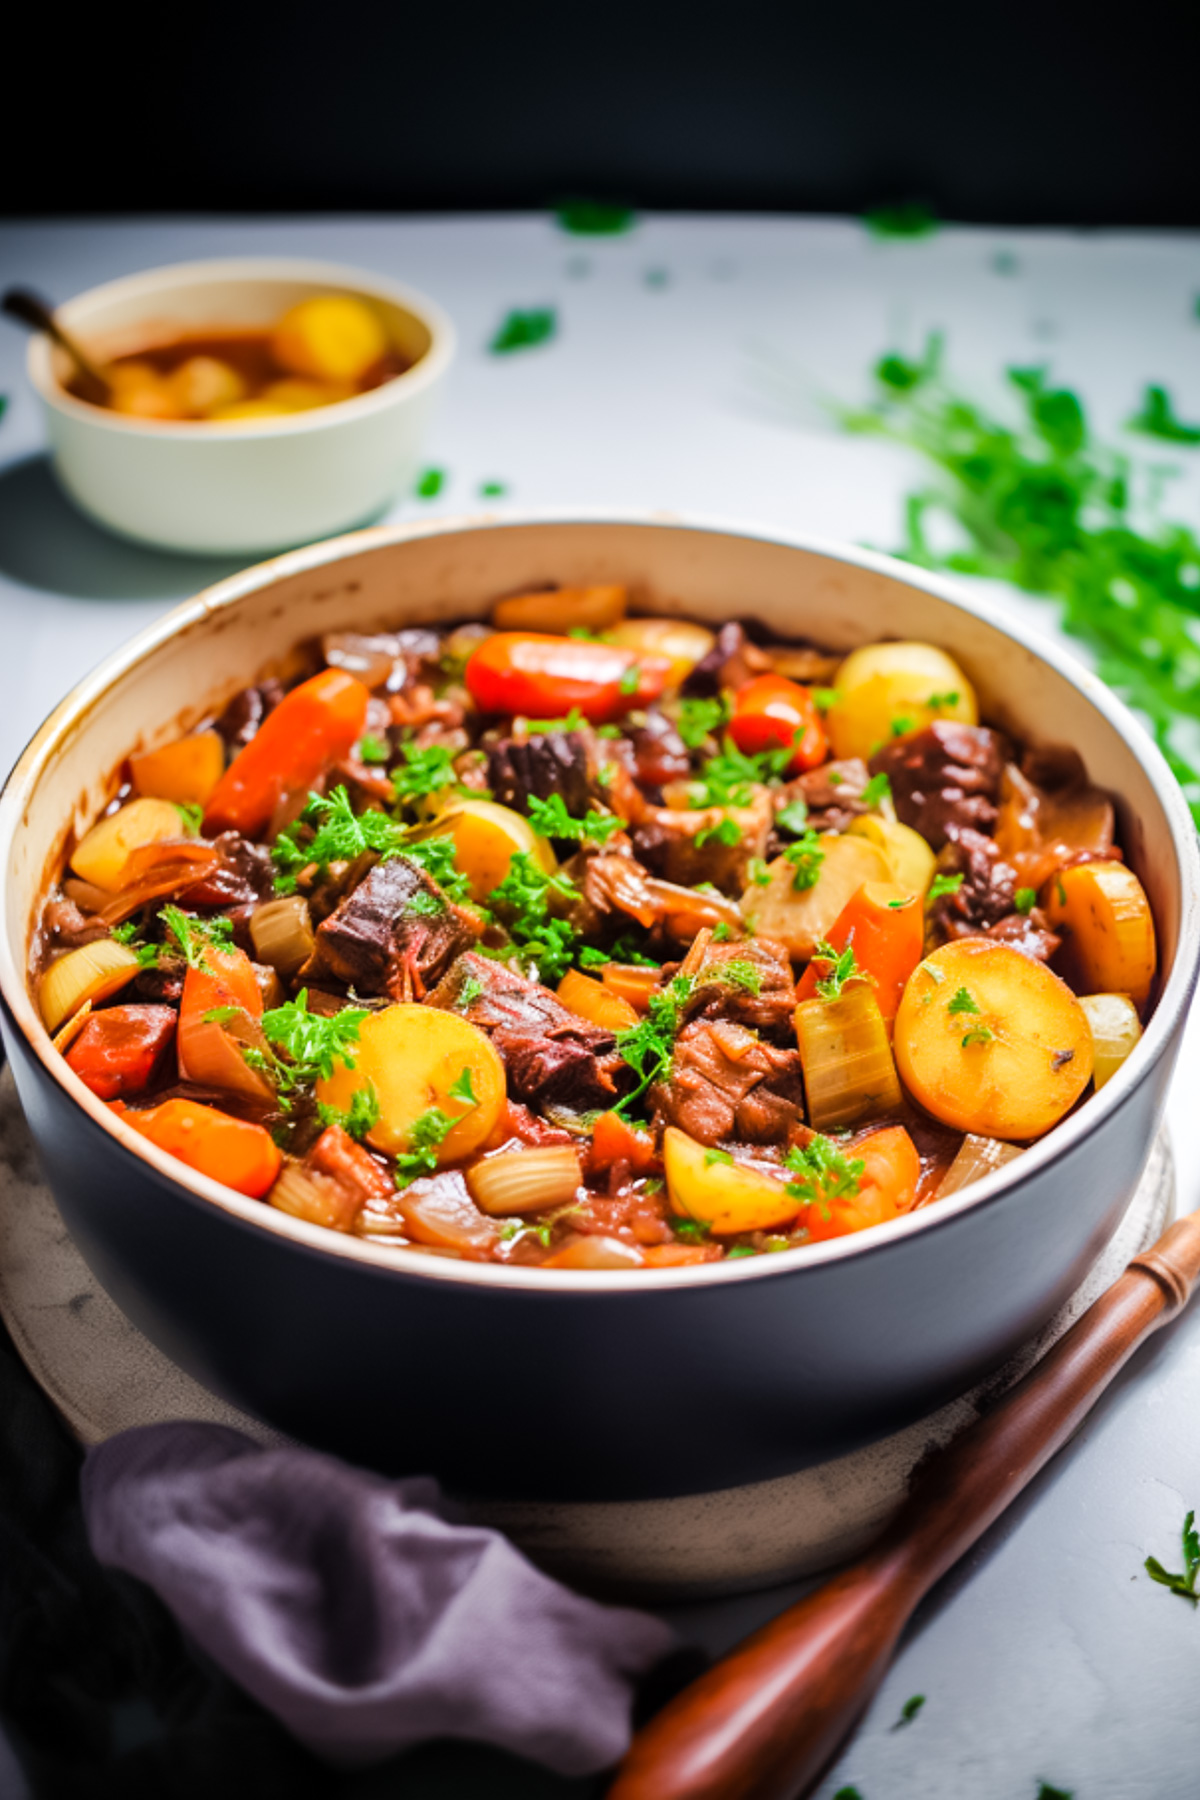 A bowl of vegetable beef stew that includes carrots, celery, potatoes and large pieces of beef topped wit parsley.